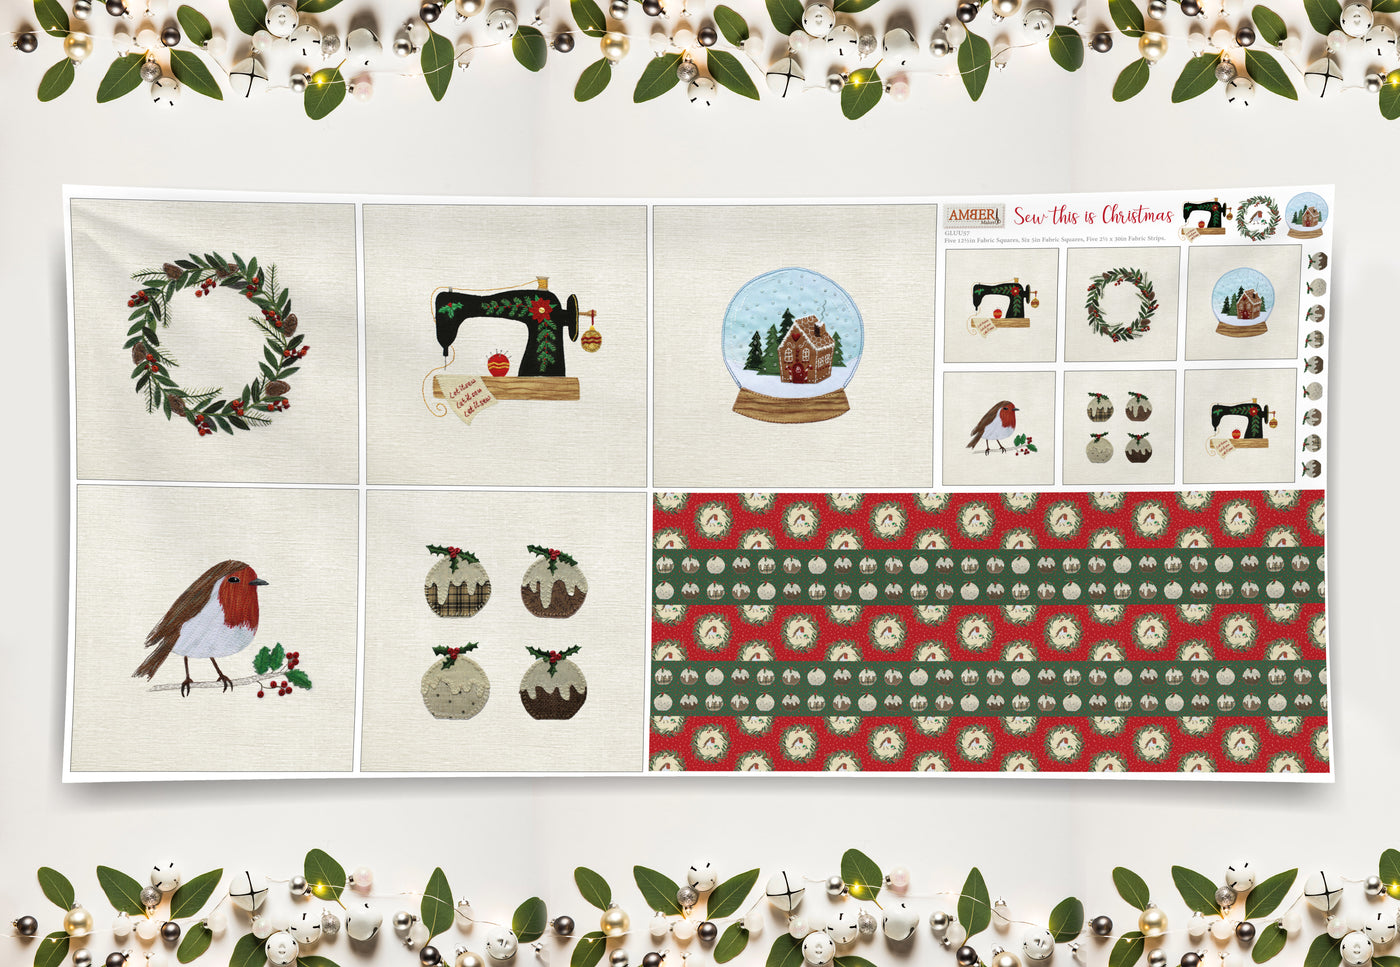 Sew This is Christmas Canvas Fabric Panel